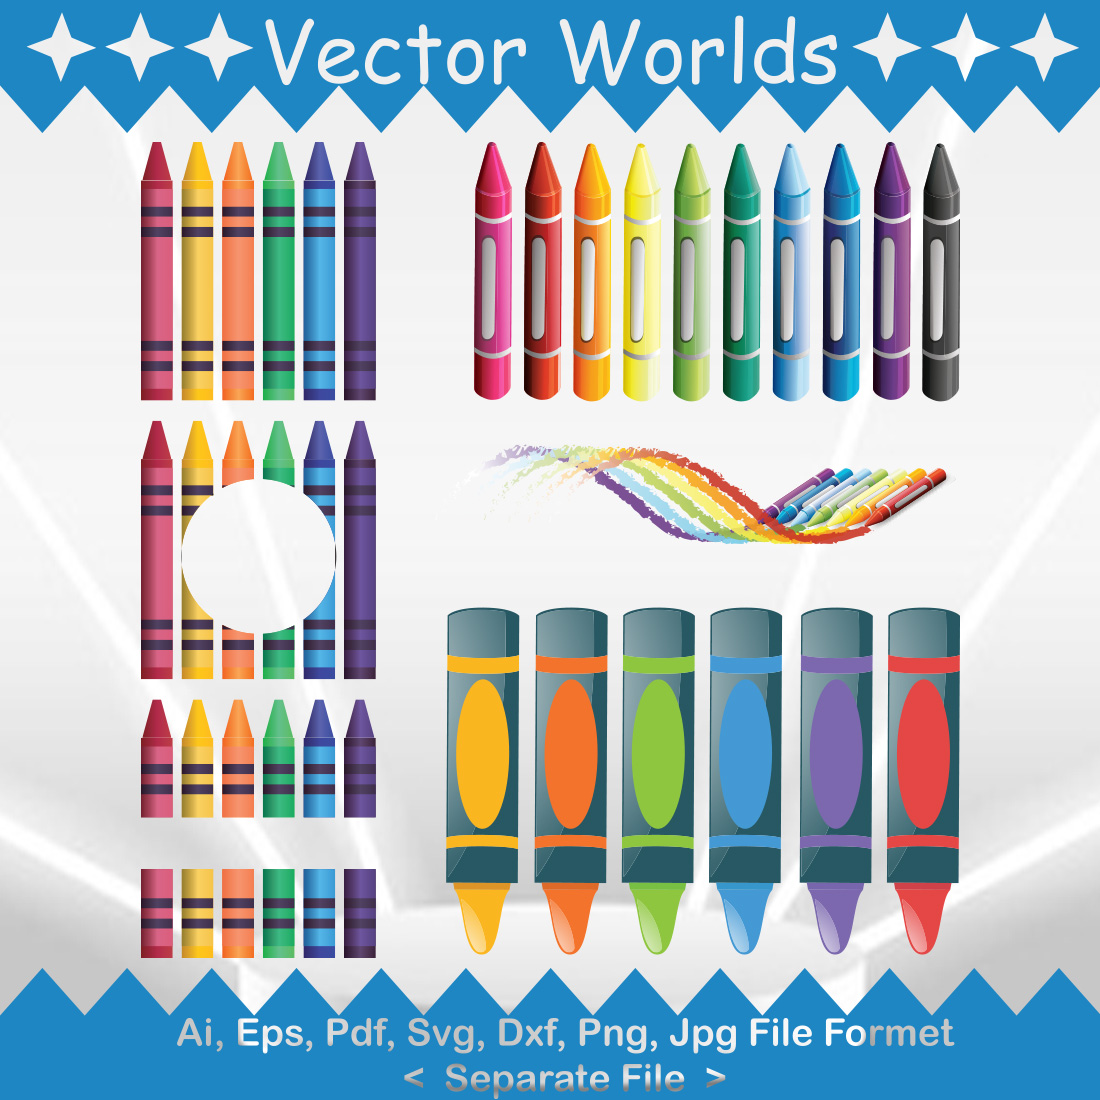 A selection of exquisite vector images of crayons